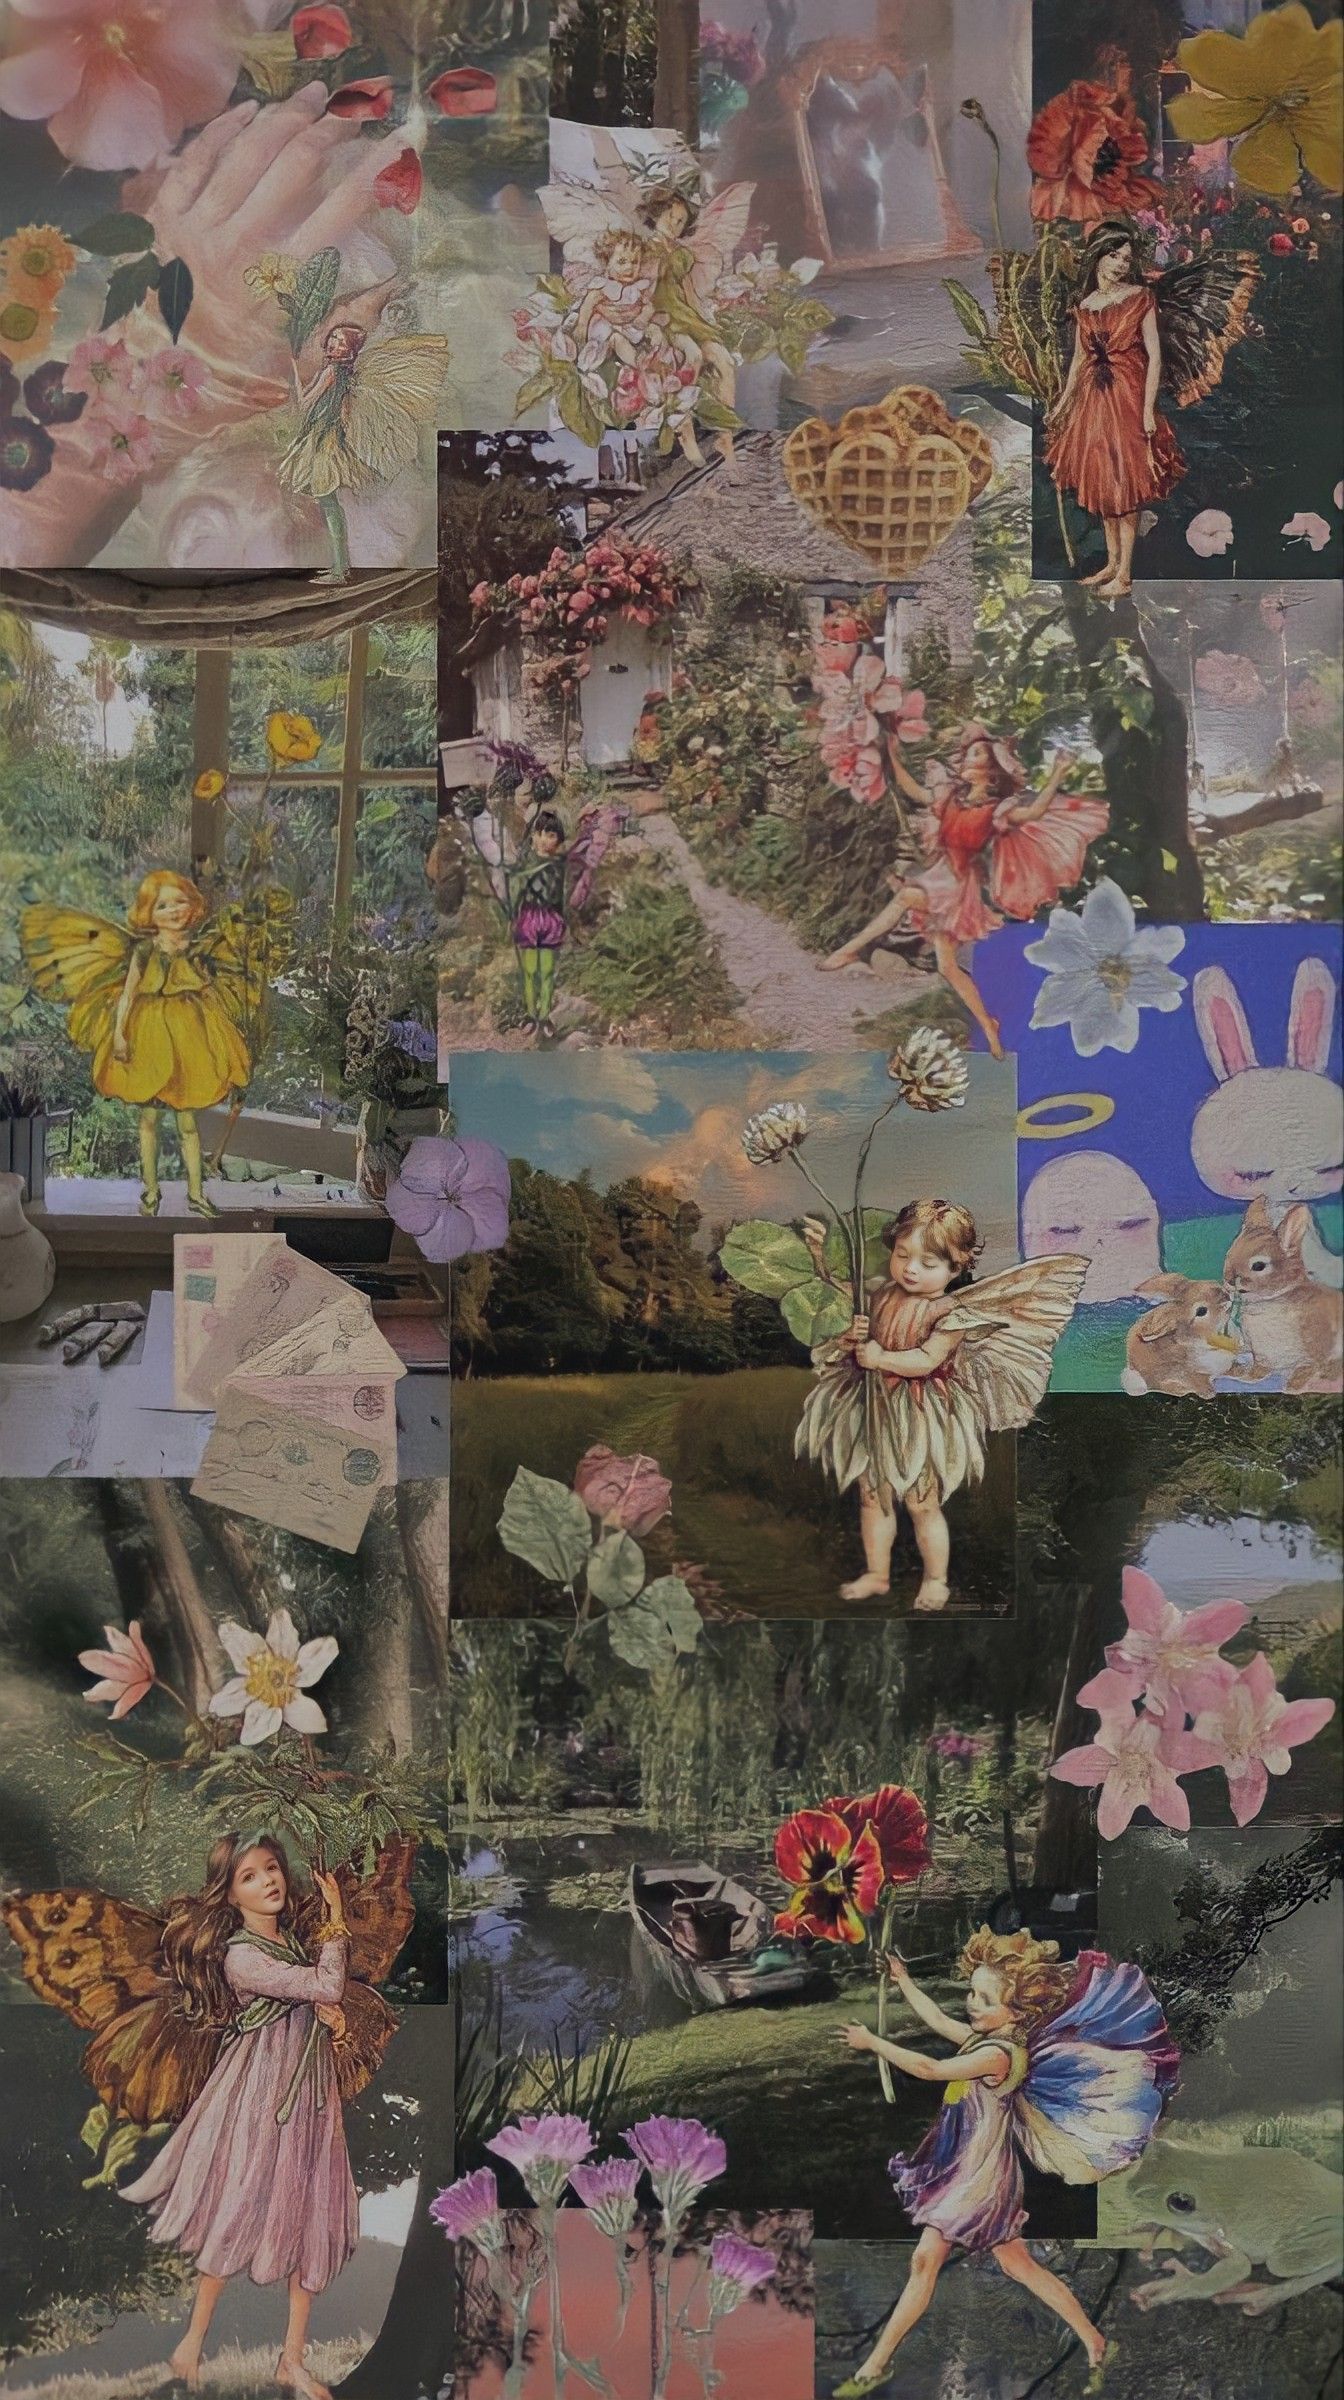 A collage of pictures of fairies, flowers, and nature. - Goblincore